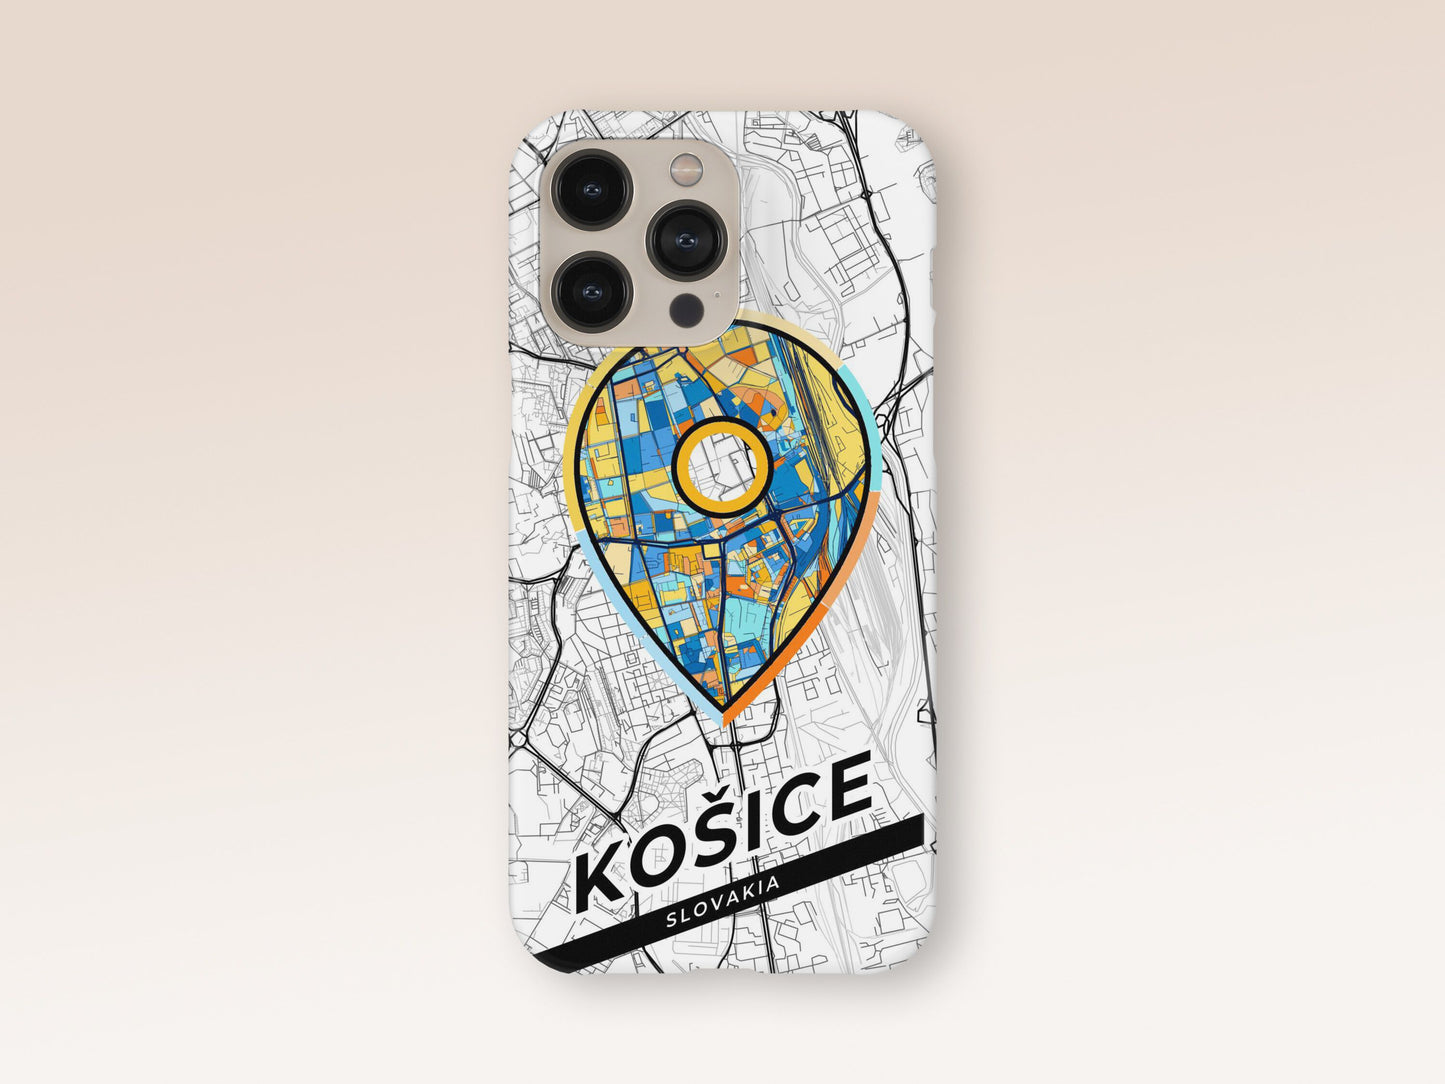 Košice Slovakia slim phone case with colorful icon. Birthday, wedding or housewarming gift. Couple match cases. 1